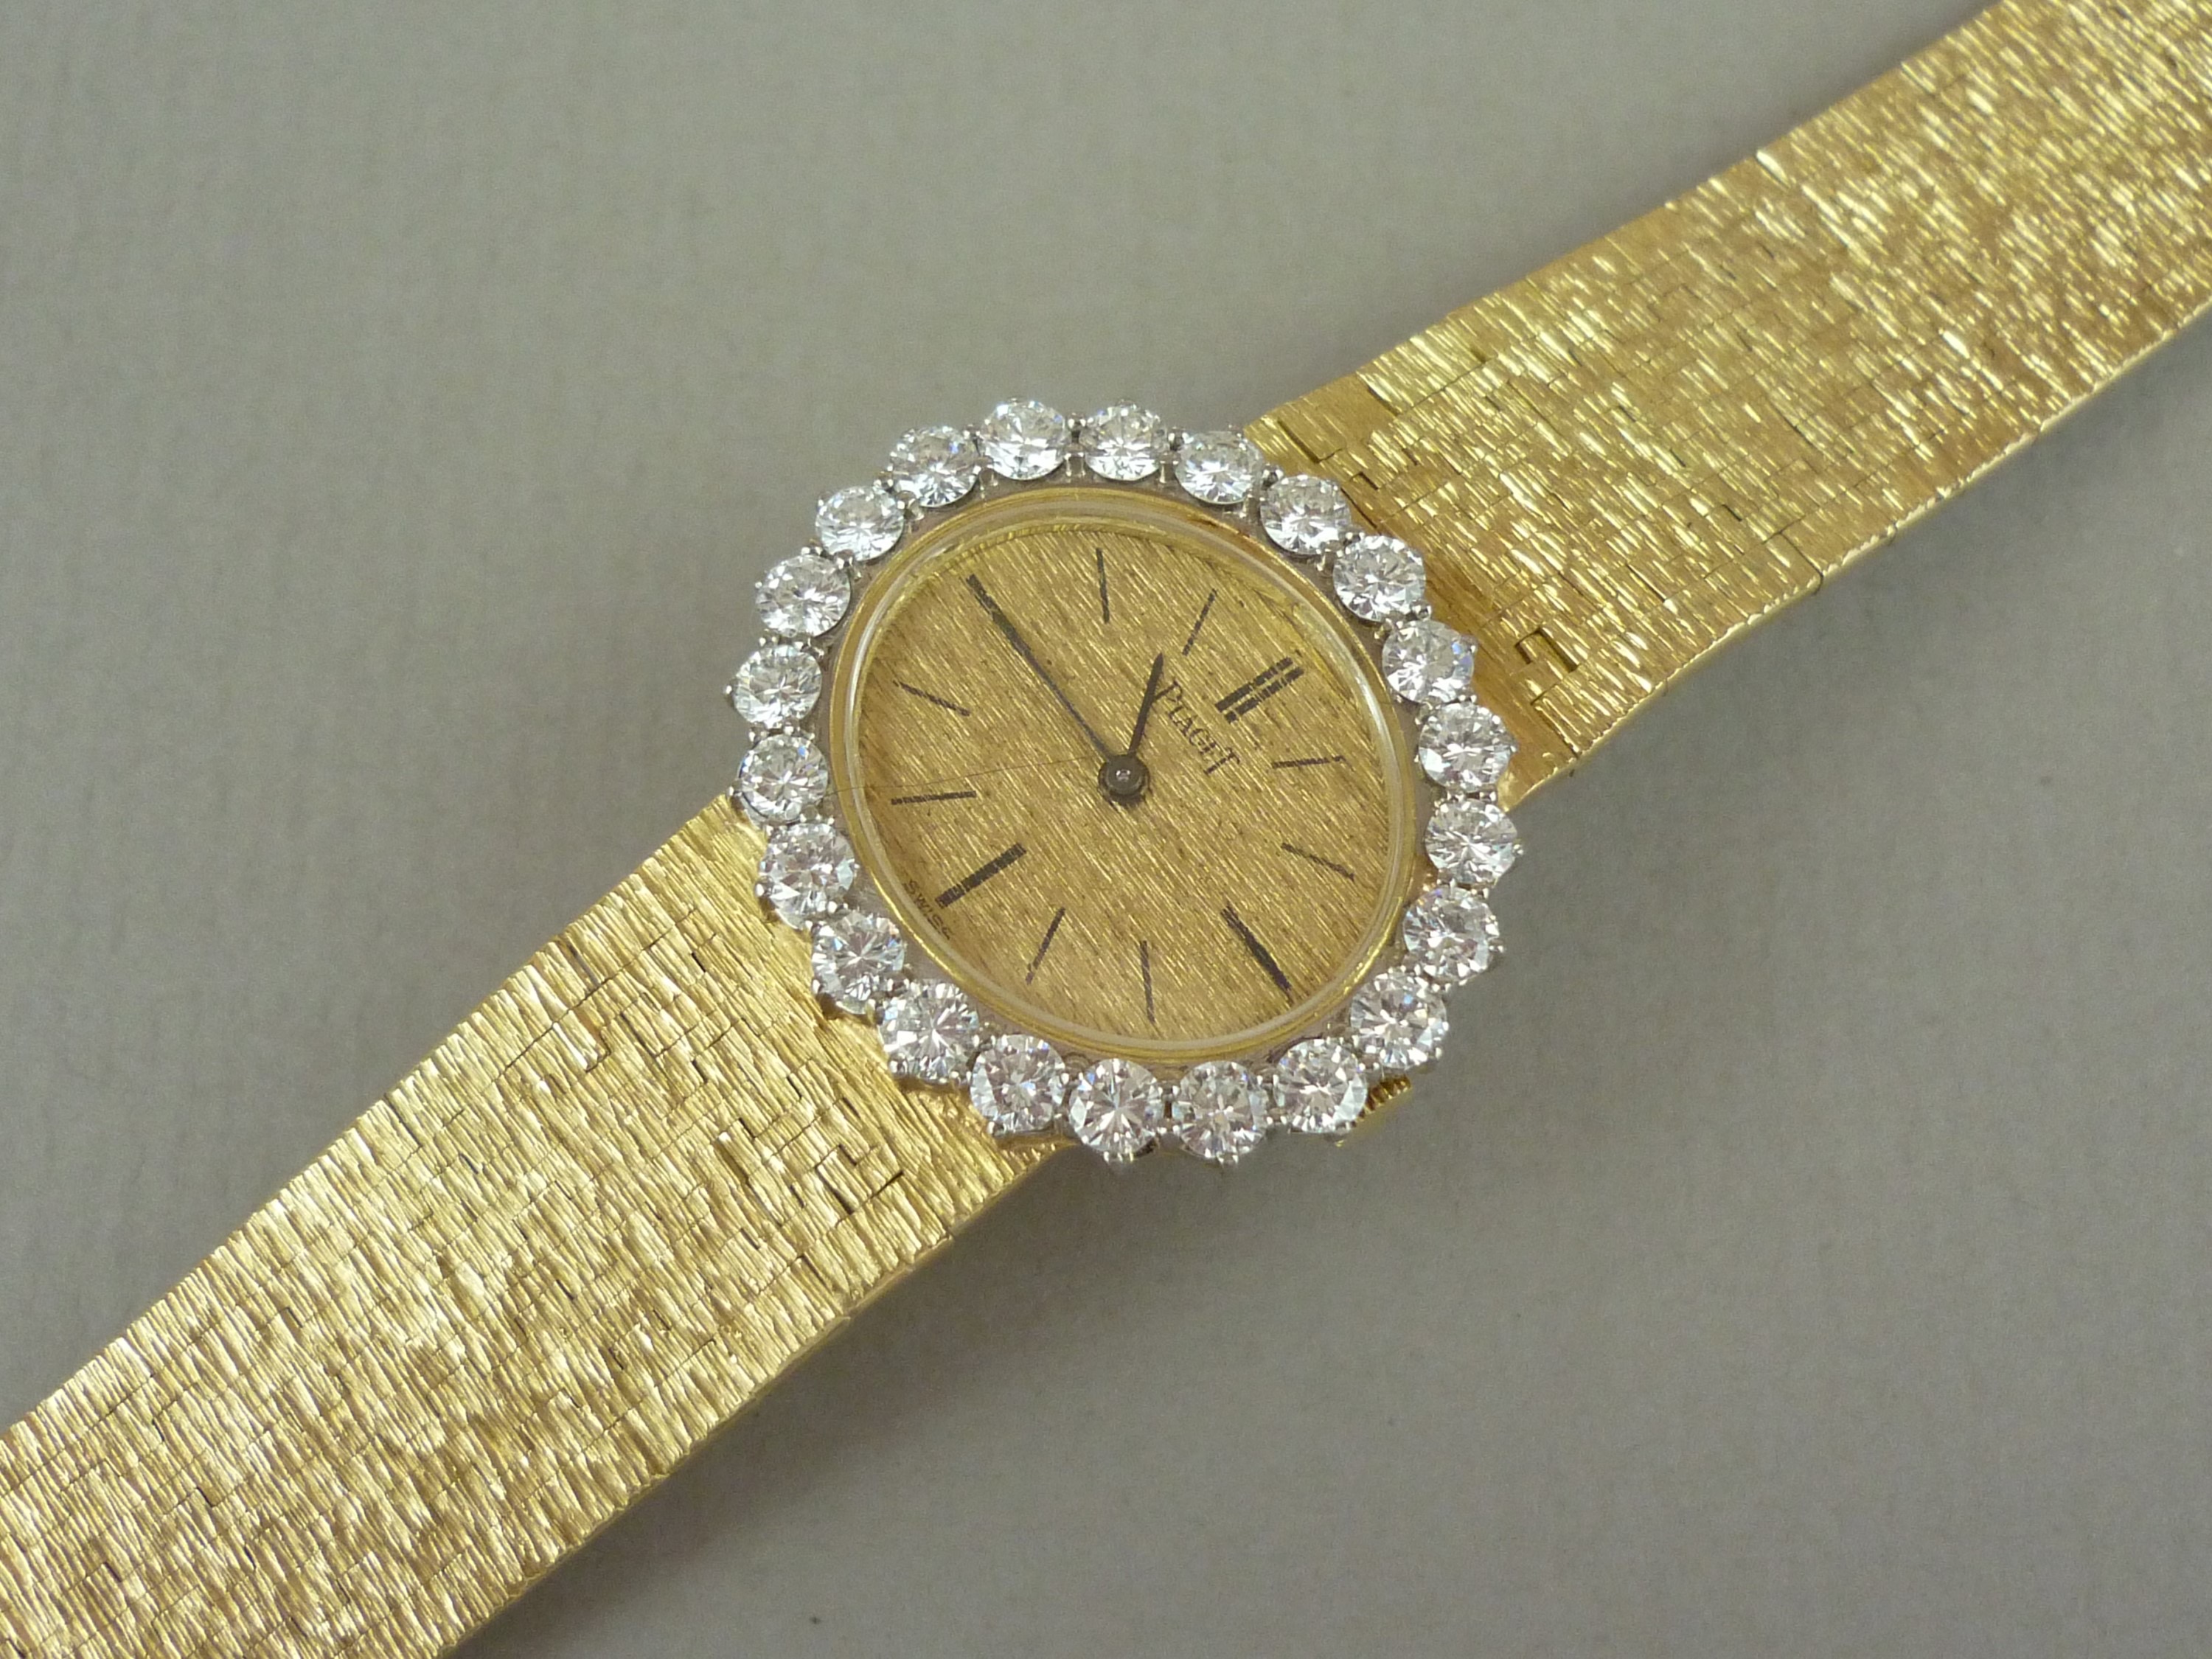 A Piaget 18ct gold and diamond cocktail watch, having crown wound movement, textured oval face - Image 2 of 3